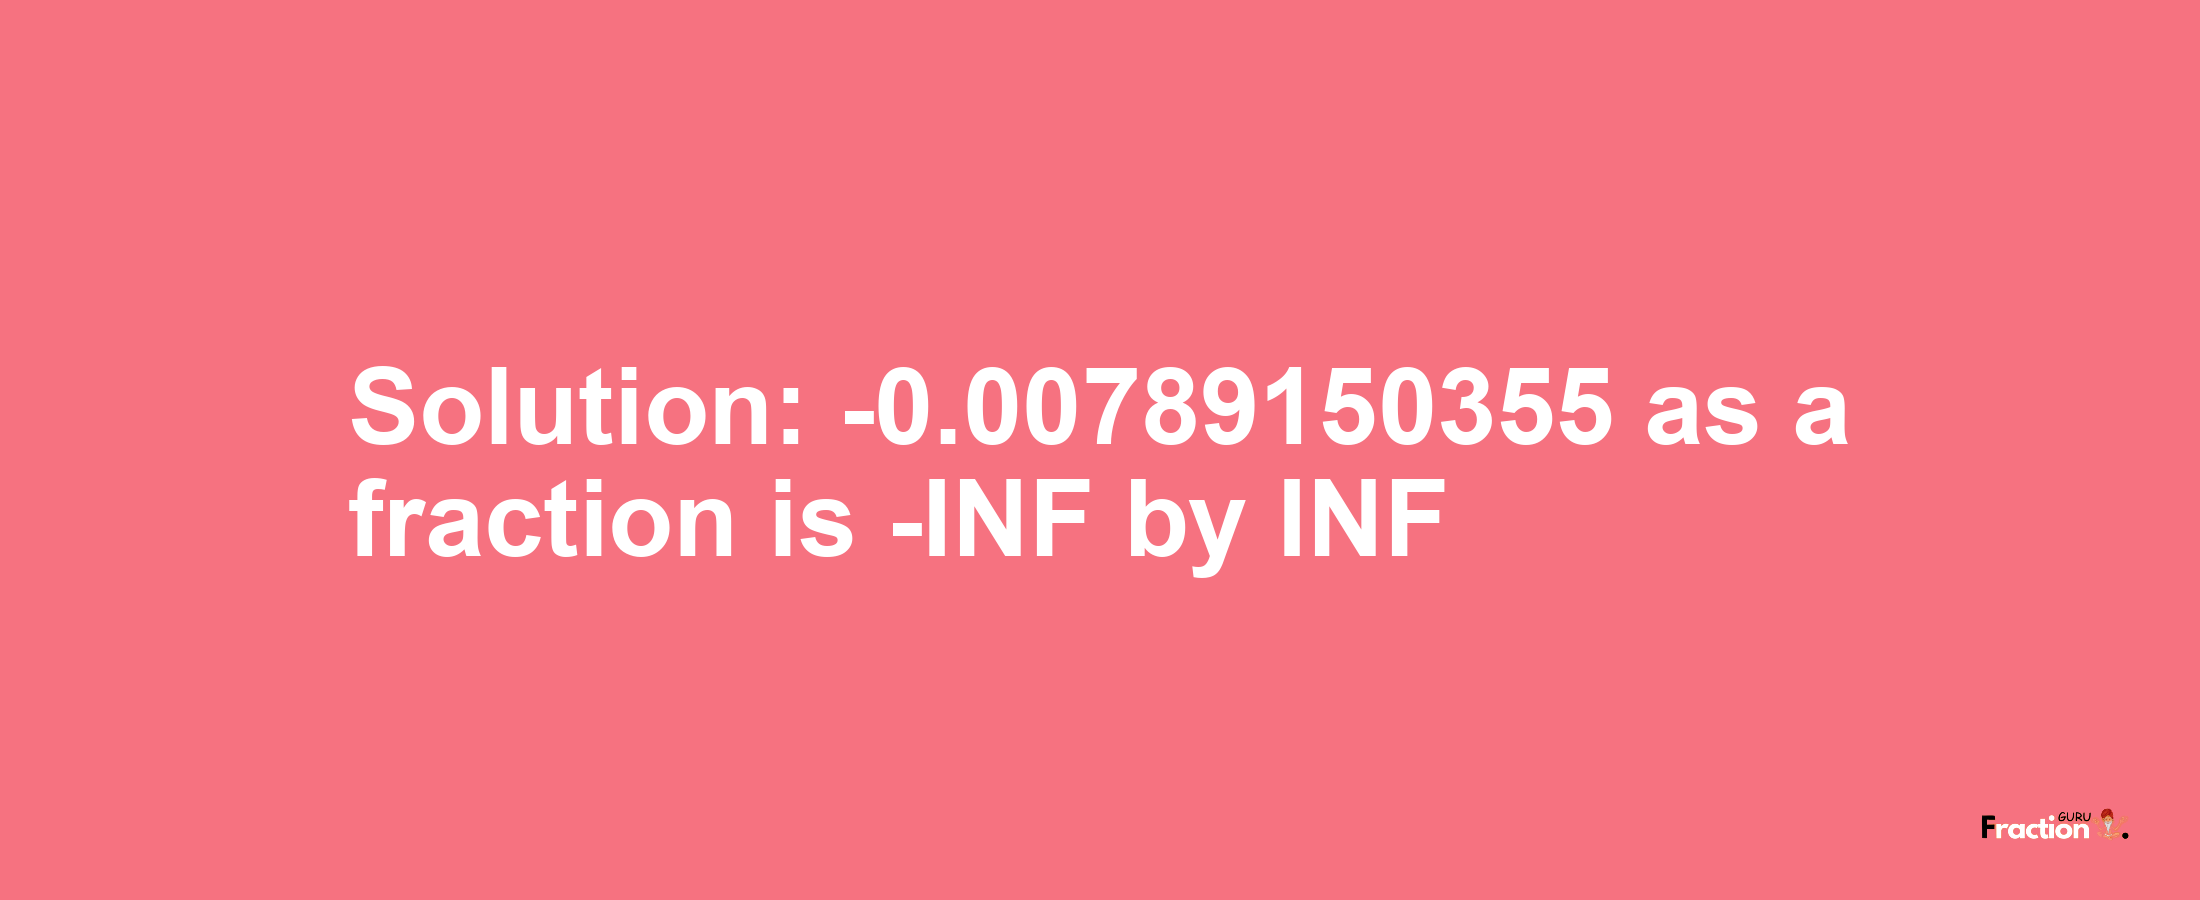 Solution:-0.00789150355 as a fraction is -INF/INF